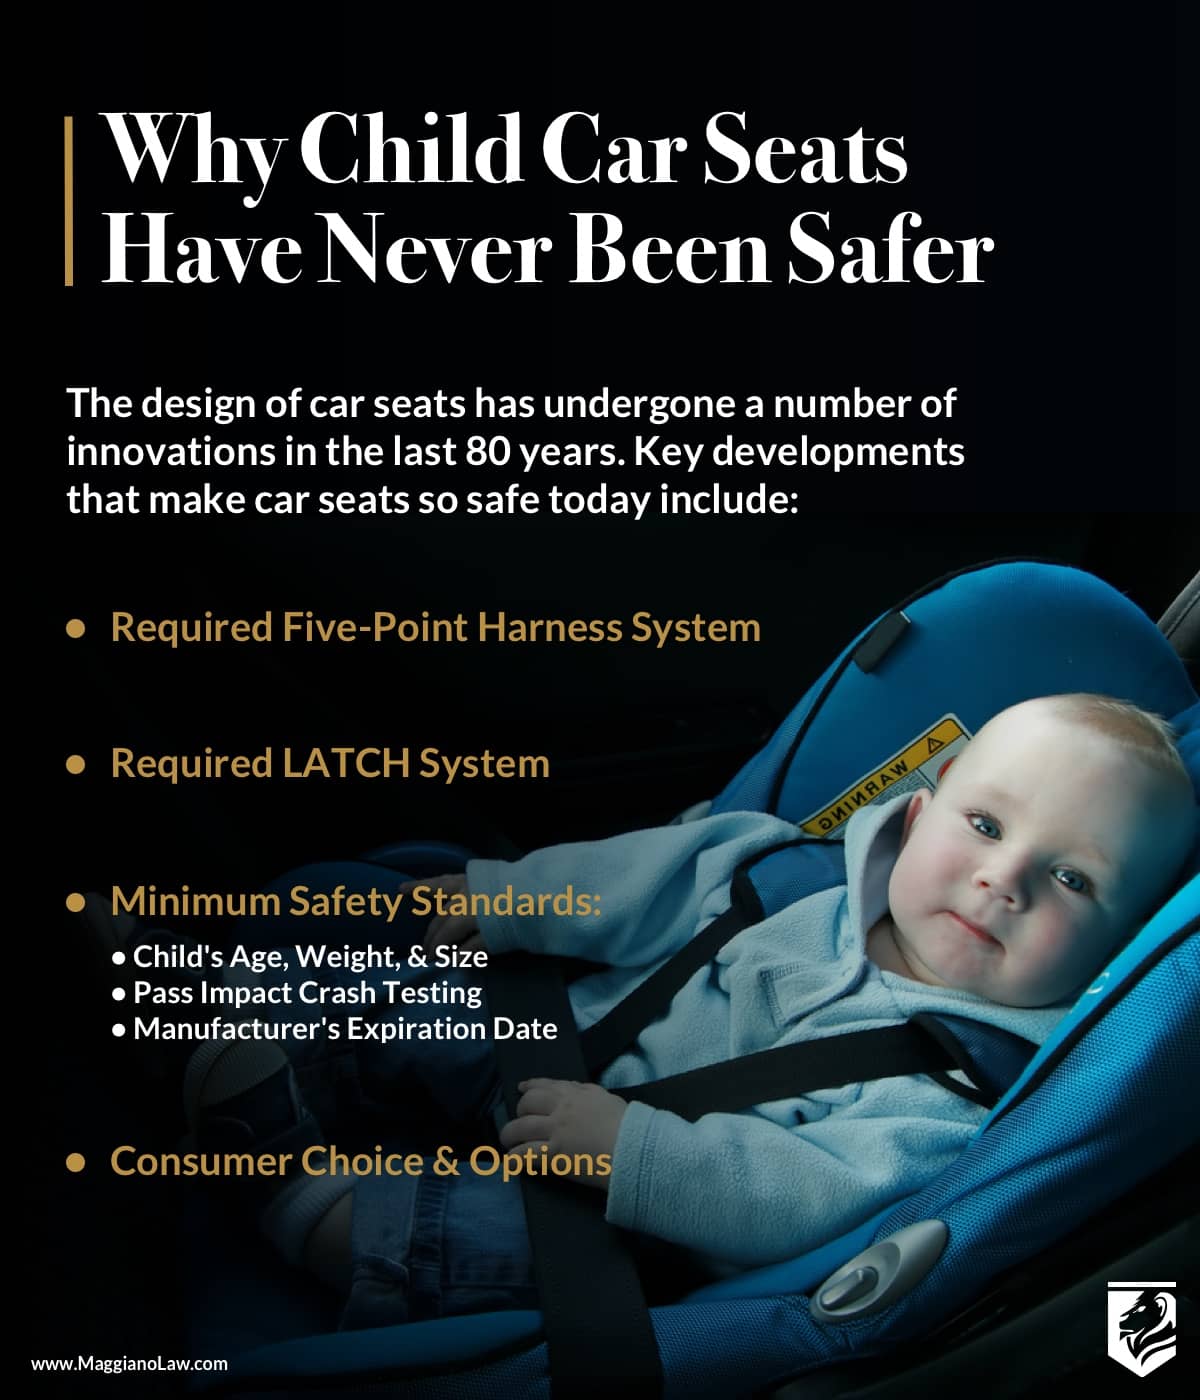 https://www.maggianolaw.com/wp-content/uploads/2018/04/car-seats-safer-than-ever.jpg